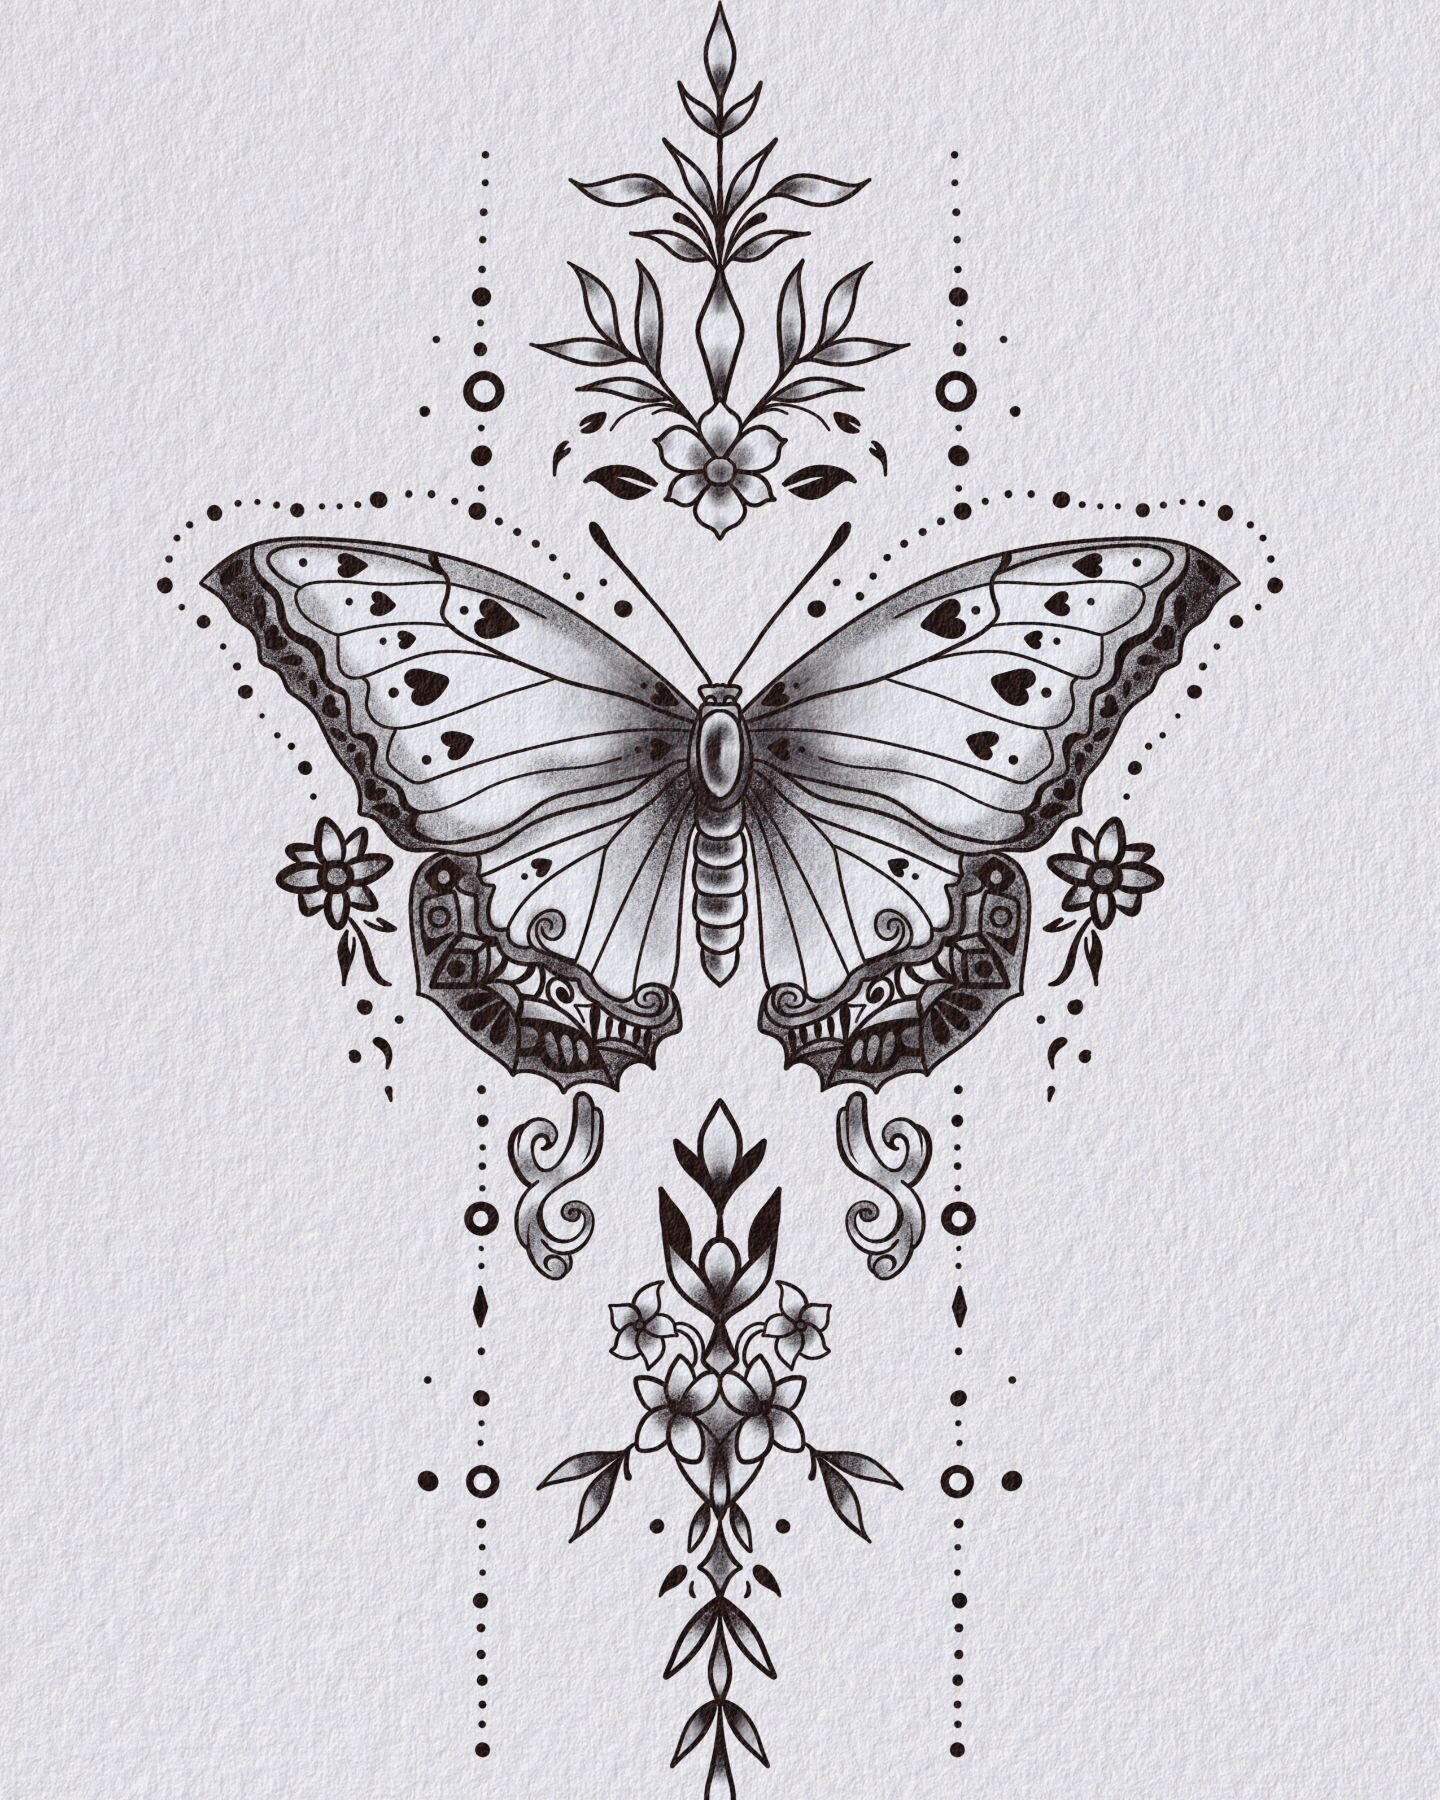 Some new flash! swipe to see these butterfly designs (: I think these would go really nicely on a calf or upper arm, placement-wise. What do you think?

Hit me up to claim one of these! DM or text only. 🩷
#tattooflashart #butterflytattooflash #portl